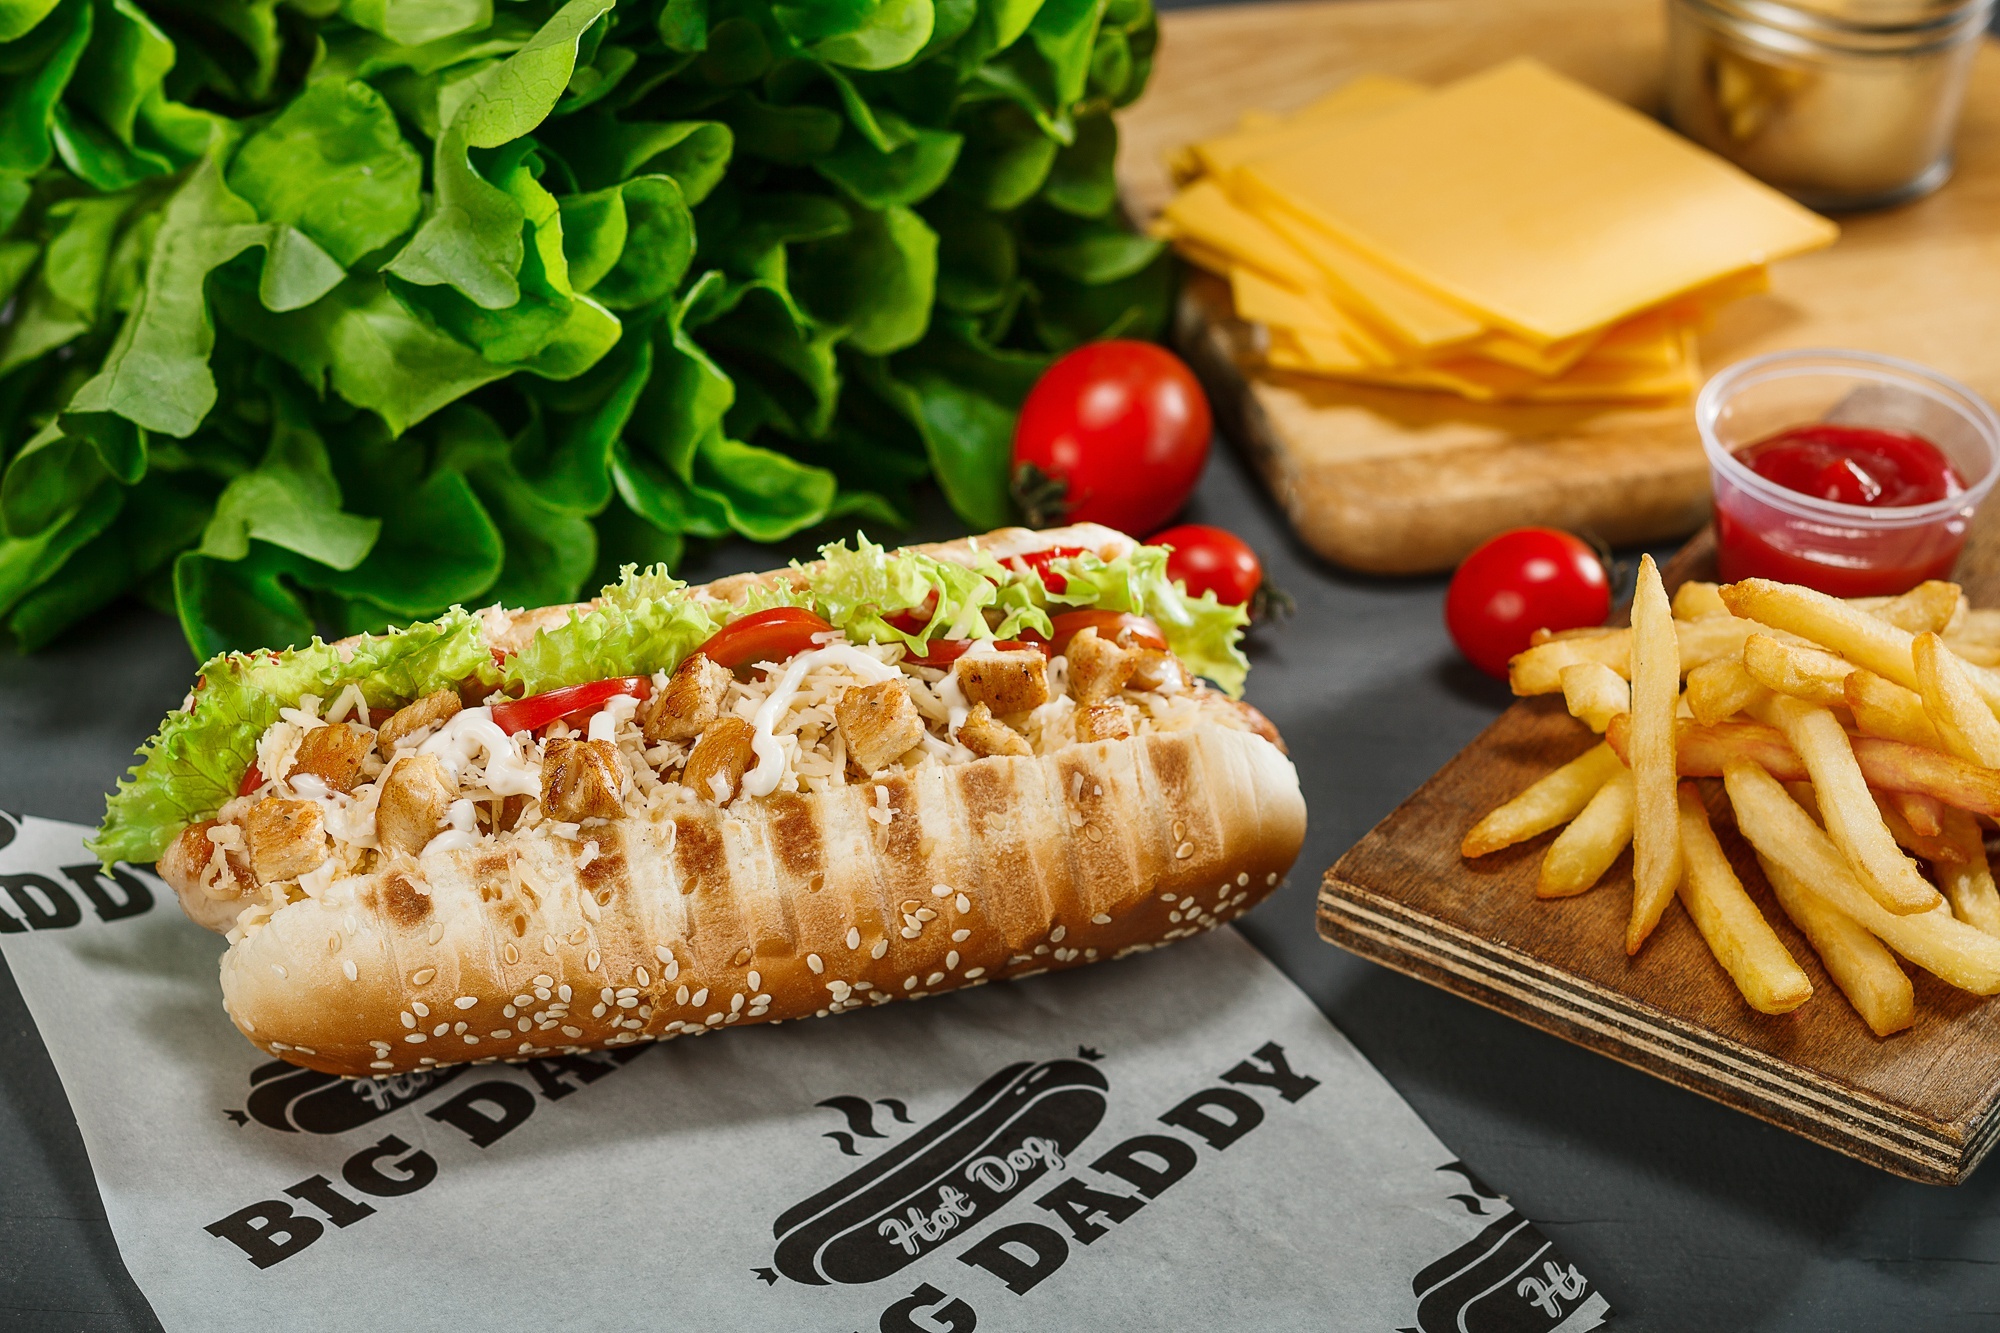 Mouthwatering hot dog, Gourmet toppings, Perfectly grilled, Summertime favorite, 2000x1340 HD Desktop